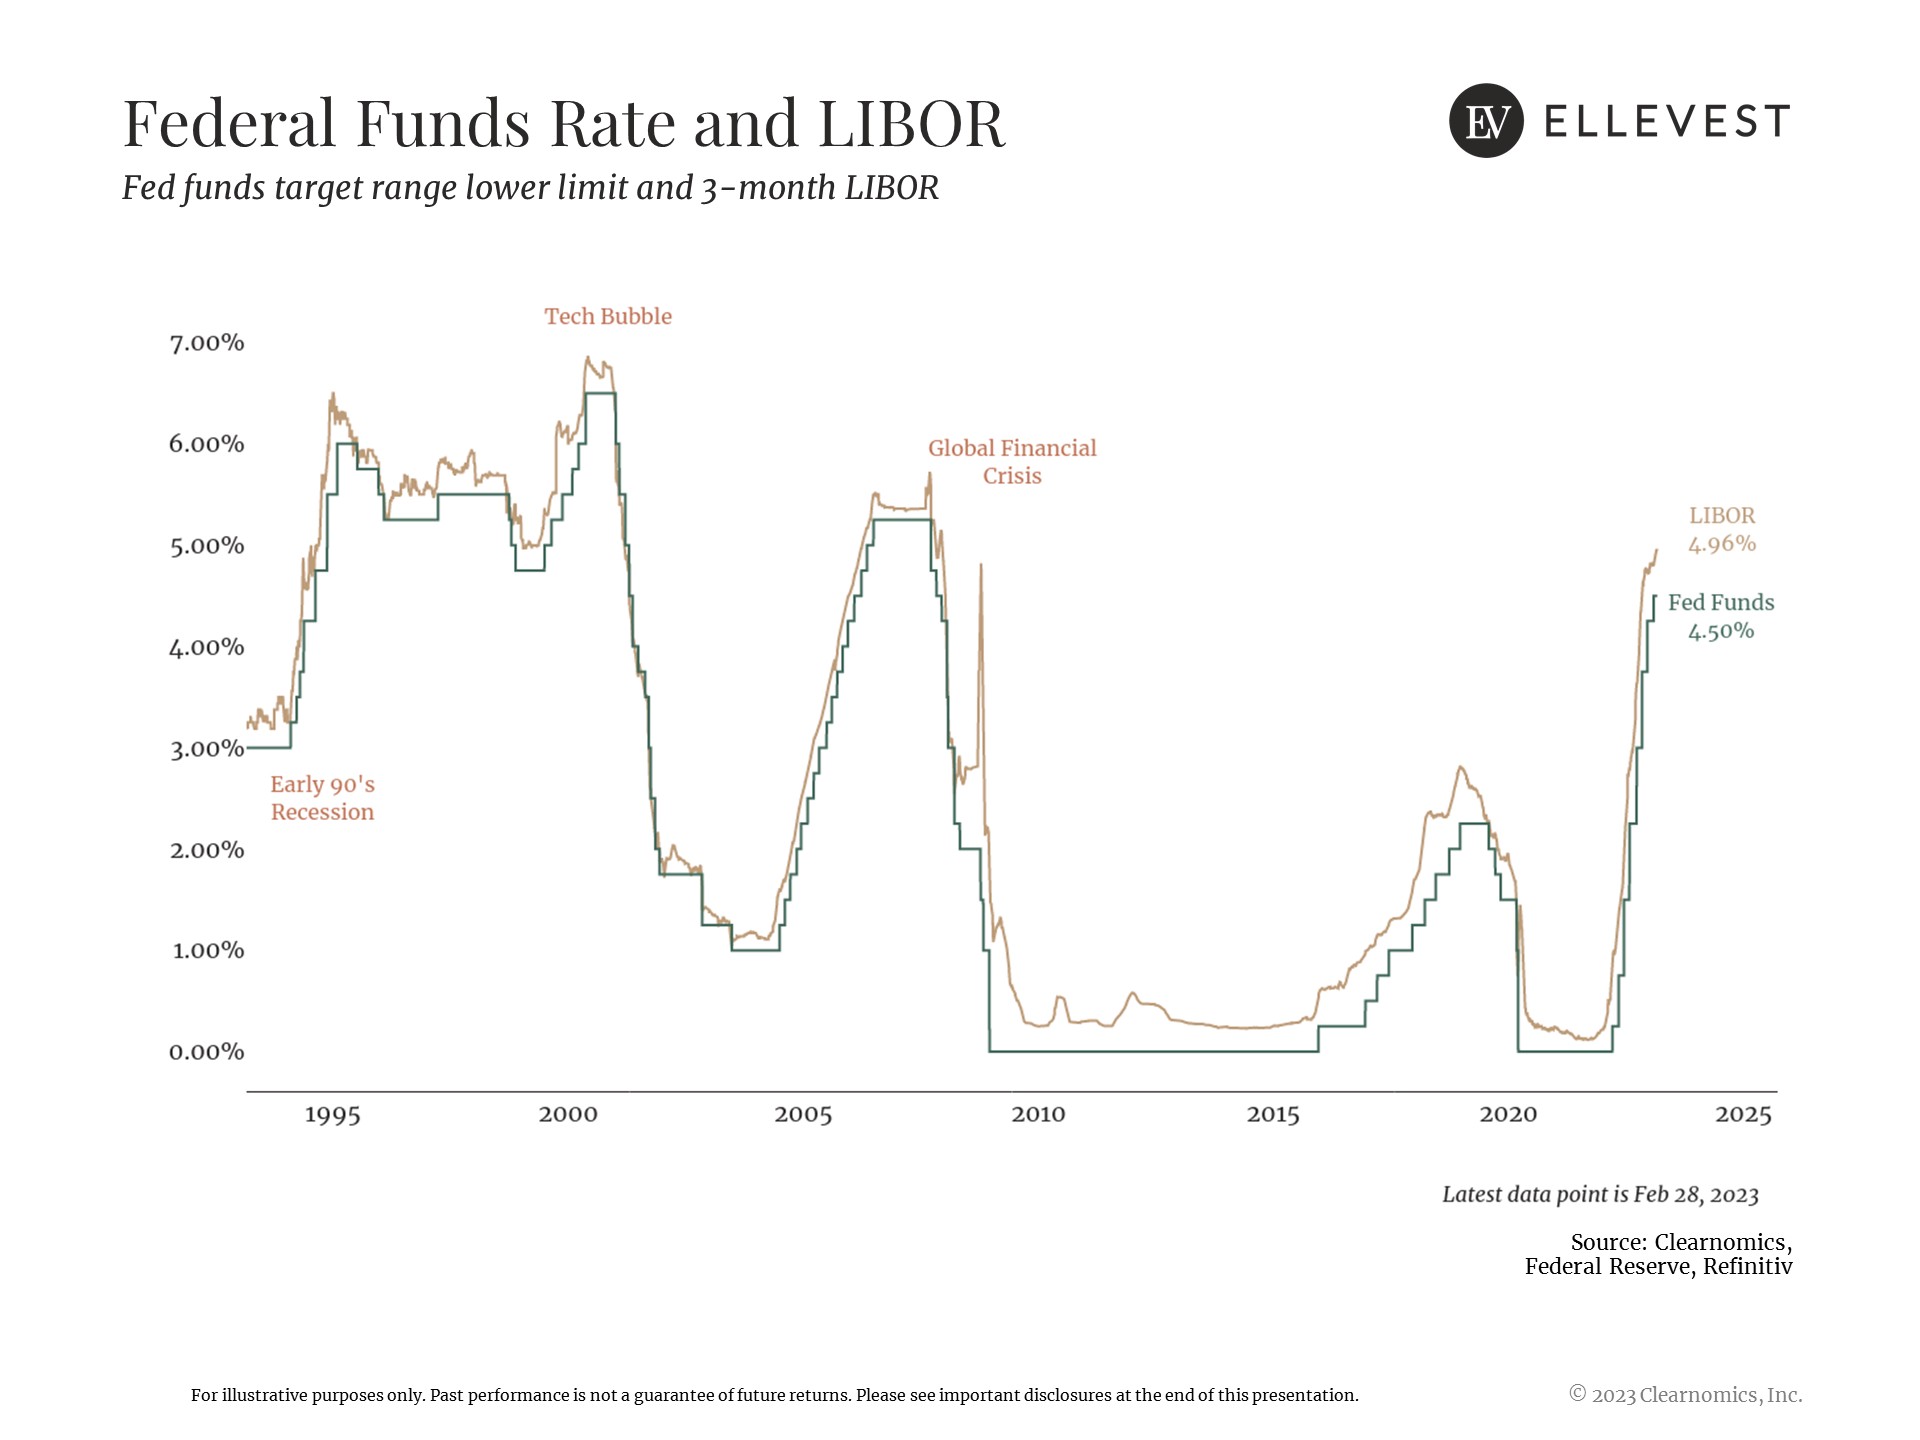 A line graph that charts the Federal funds rate and LIBOR over time, from 1995 to the present. LIBOR is currently at 4.96% and the Fed funds rate is 4.5%.